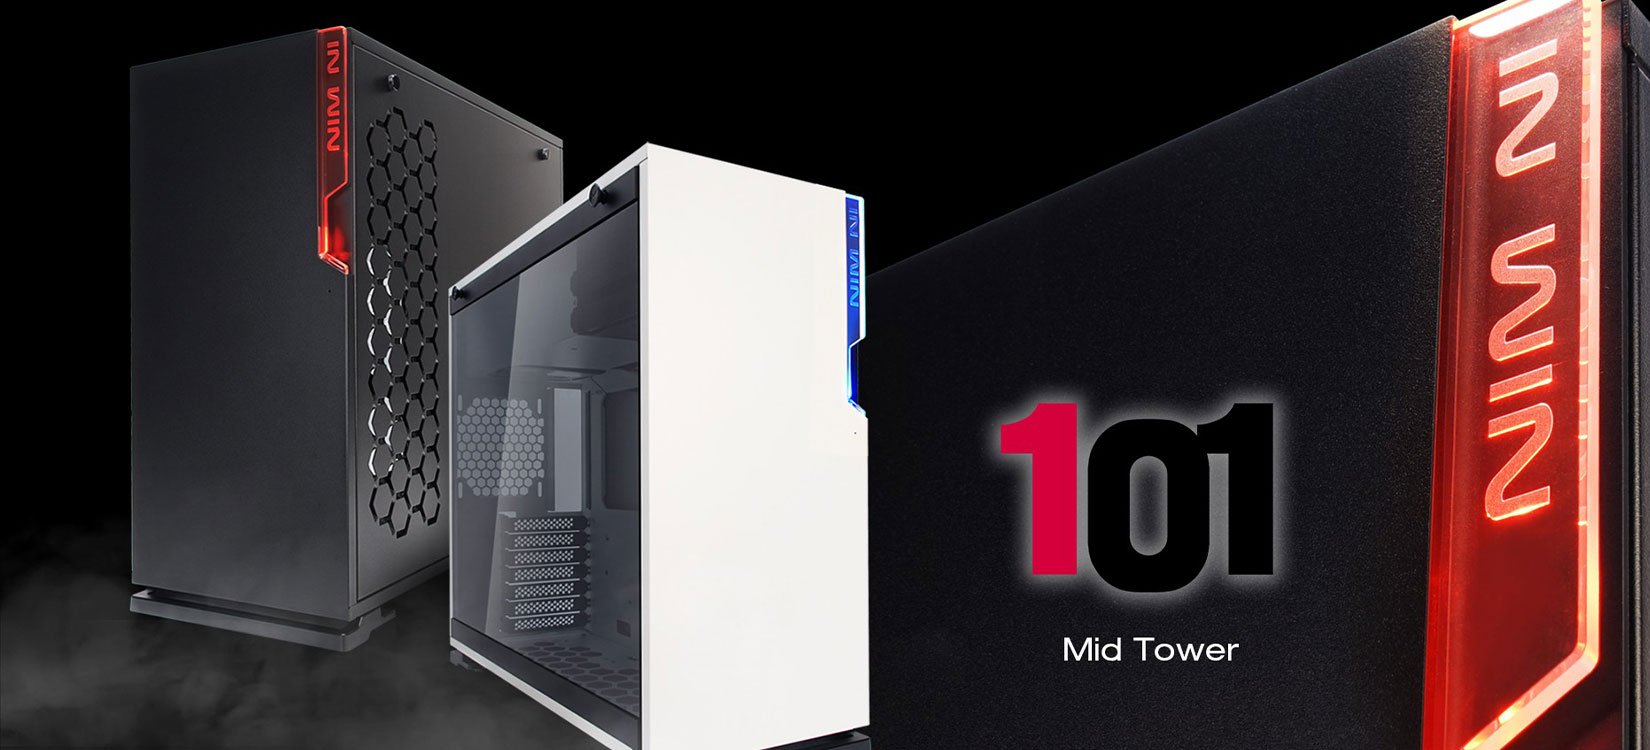 Gioi-Thieu-vo-case-inwin-101-white-full-side-tempered-glass-mid-tower-mau-den